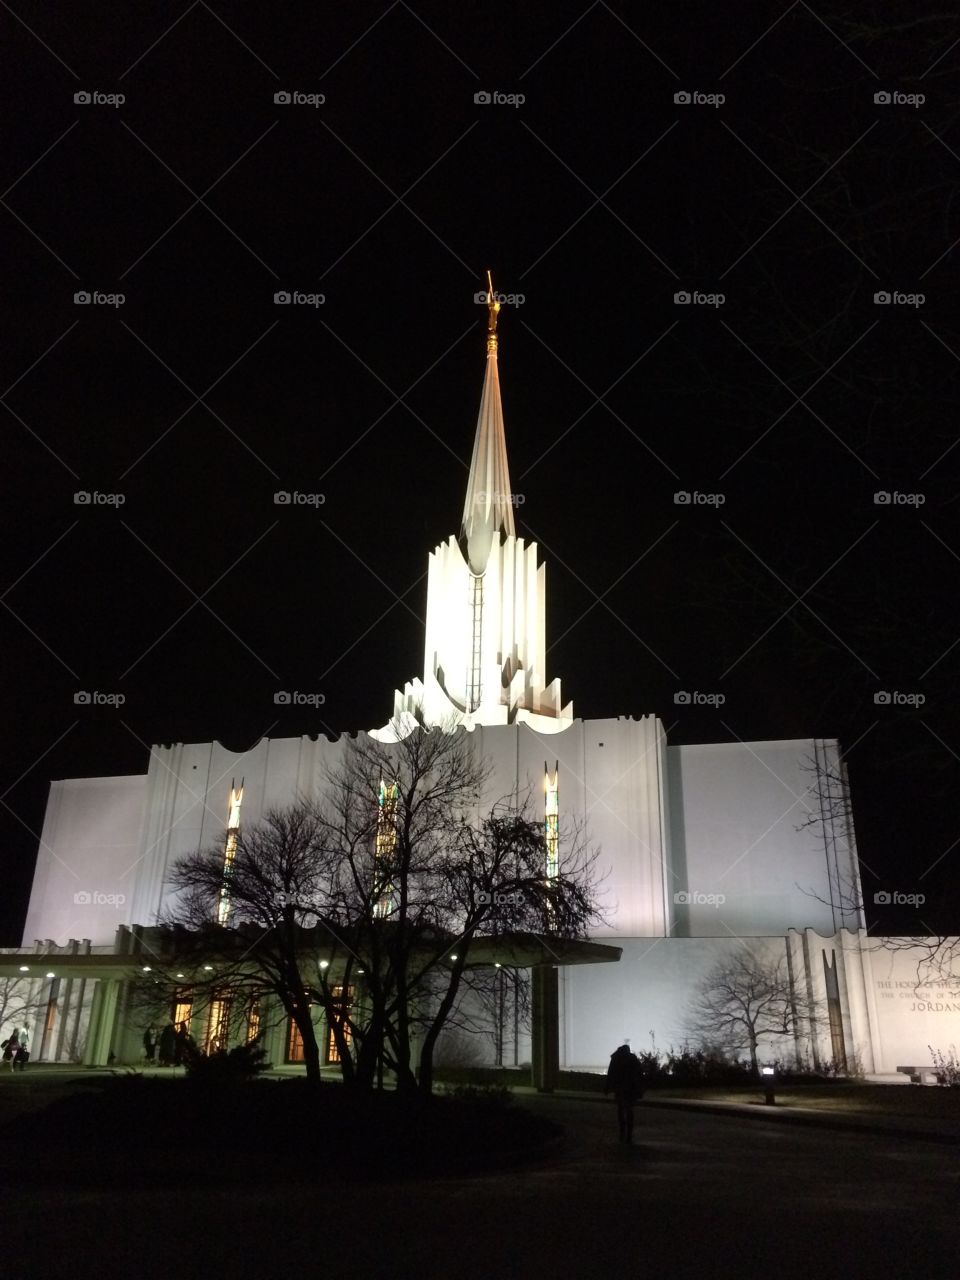 lds temple. Beautiful night shot of an lds temple